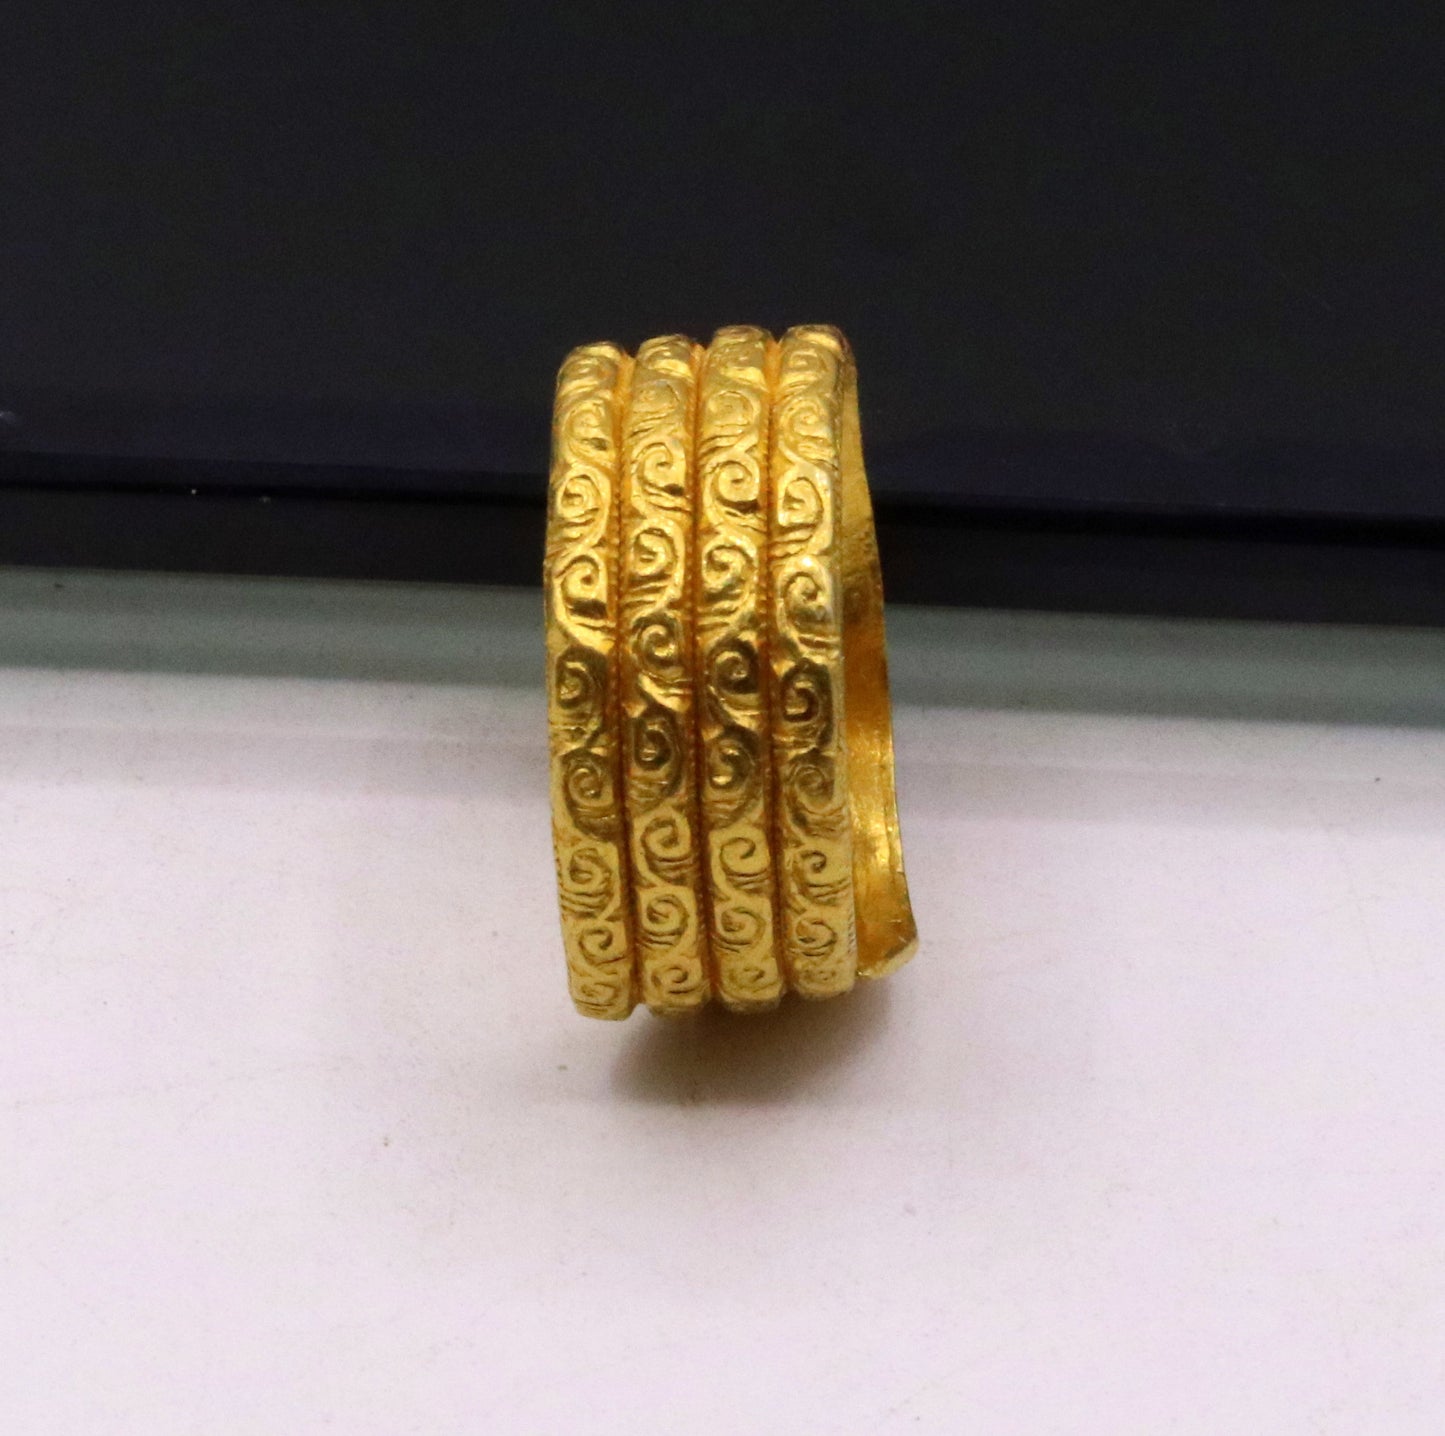 Certified solid 22kt carat yellow gold handmade unique traditional antique design ring band indian tribal jewelry unisex gifting item - TRIBAL ORNAMENTS